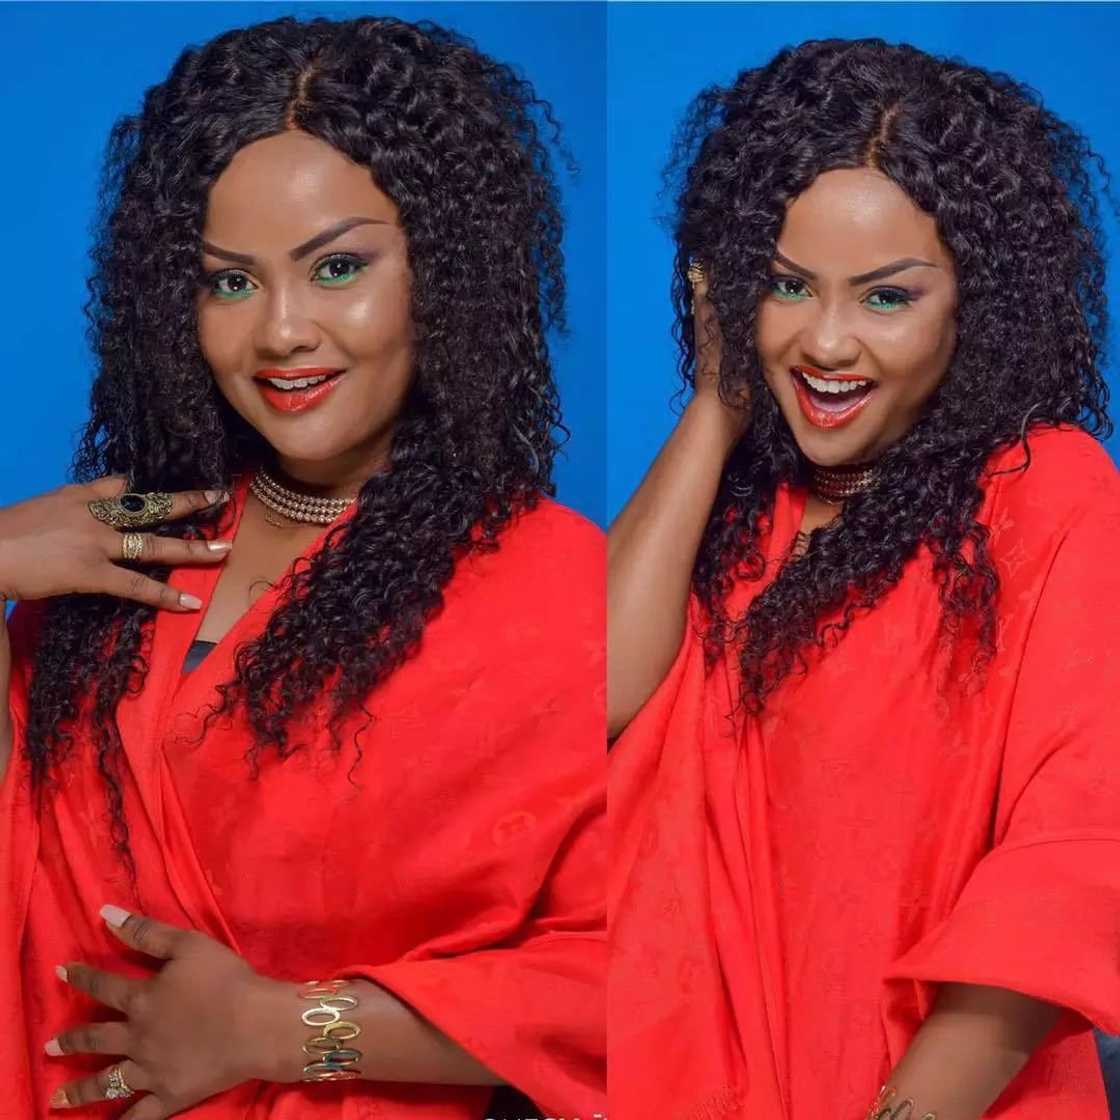 Nana Ama Mcbrown Car Accident How It Was